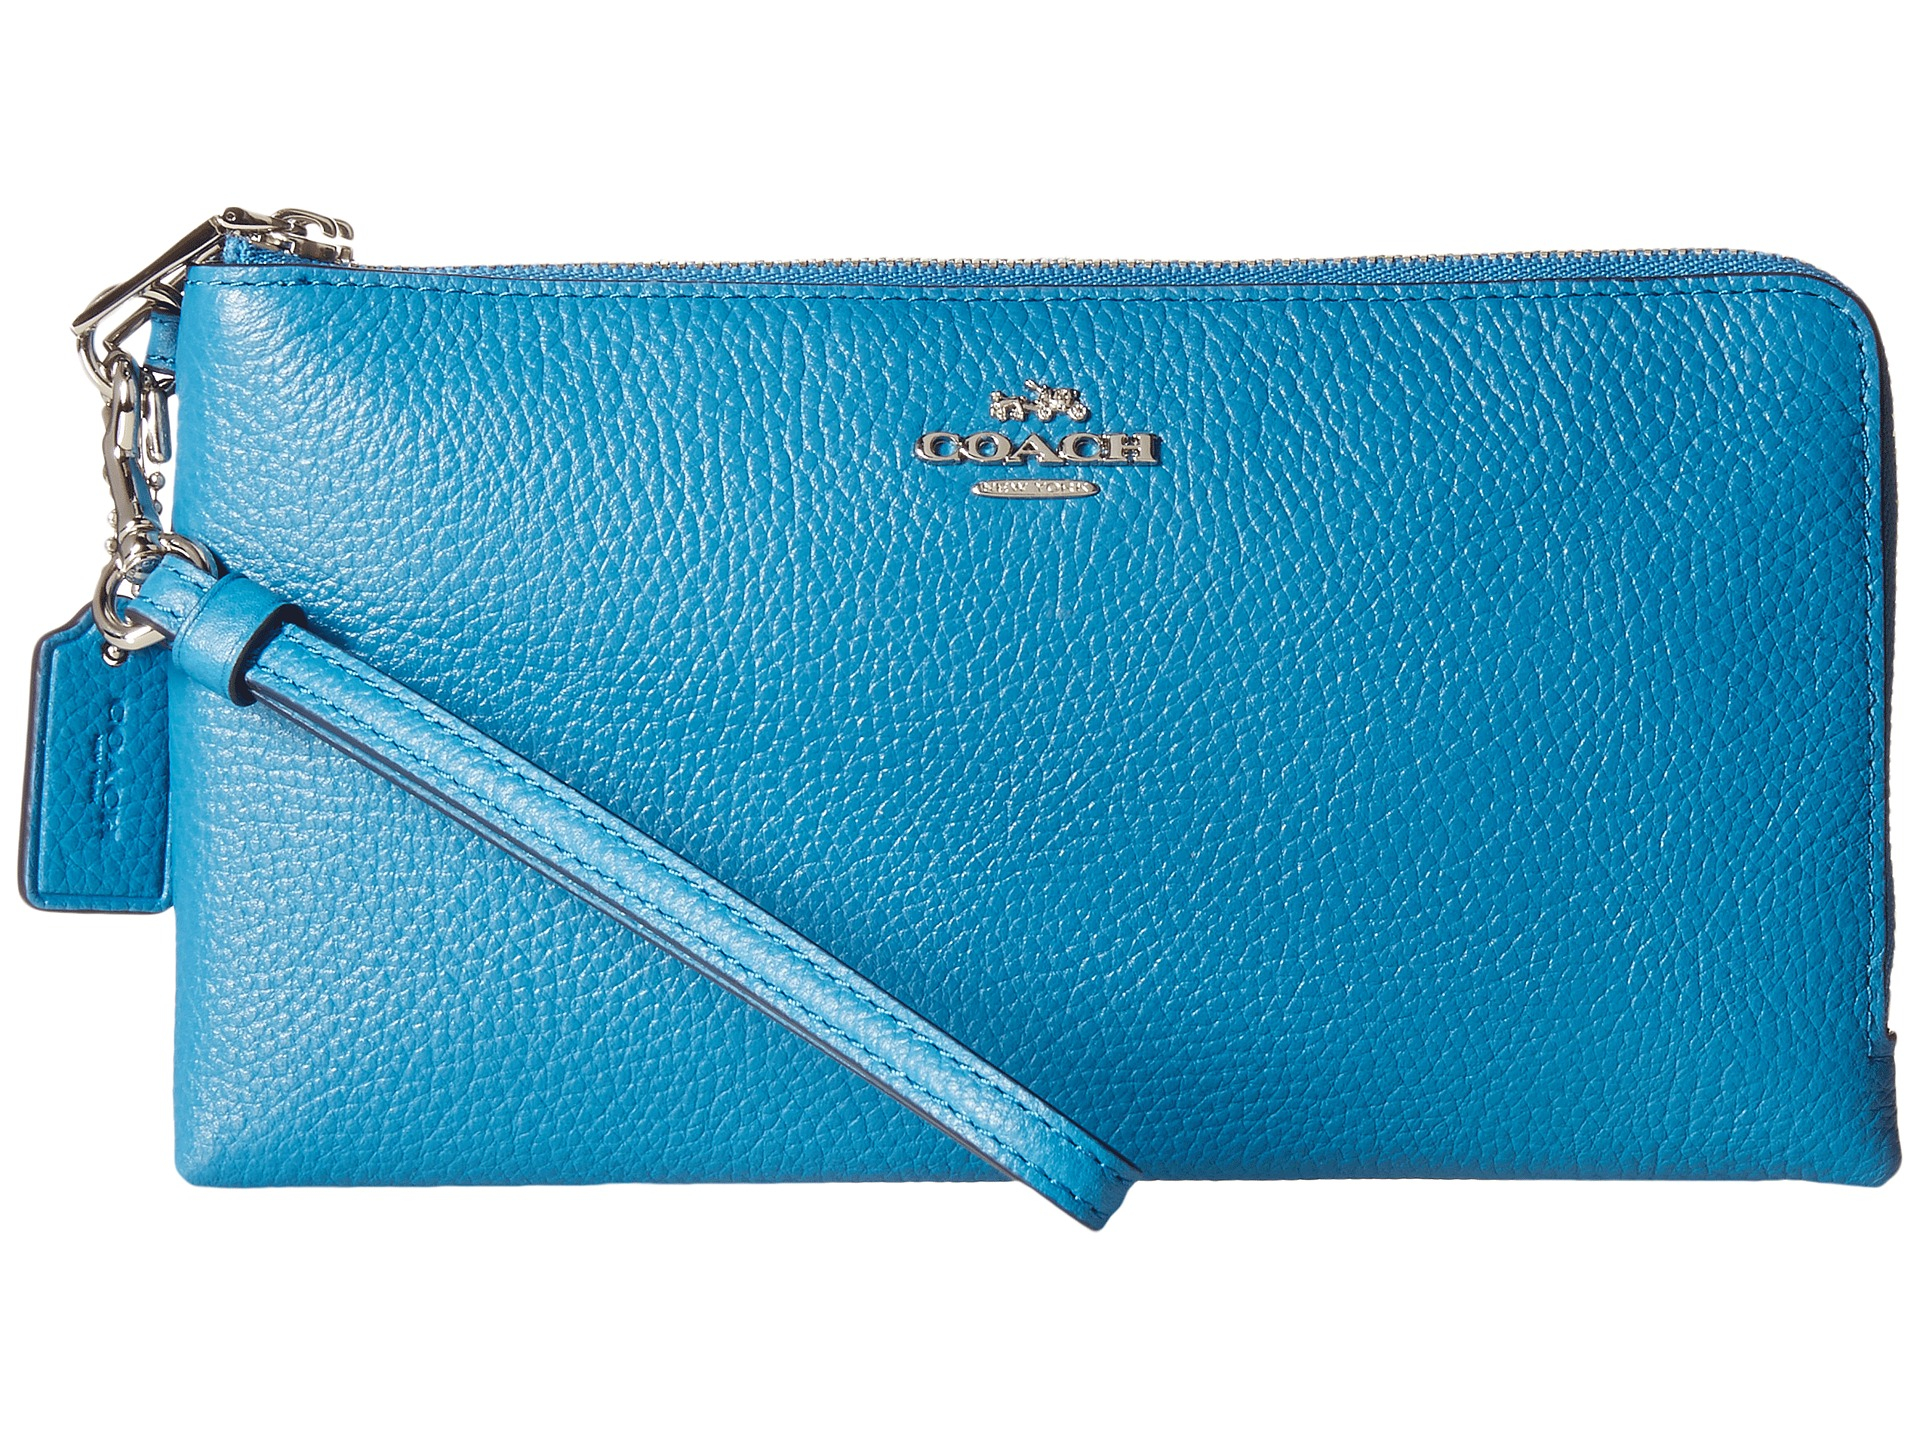 COACH Polished Pebbled Leather Double Zip Wallet in Blue | Lyst